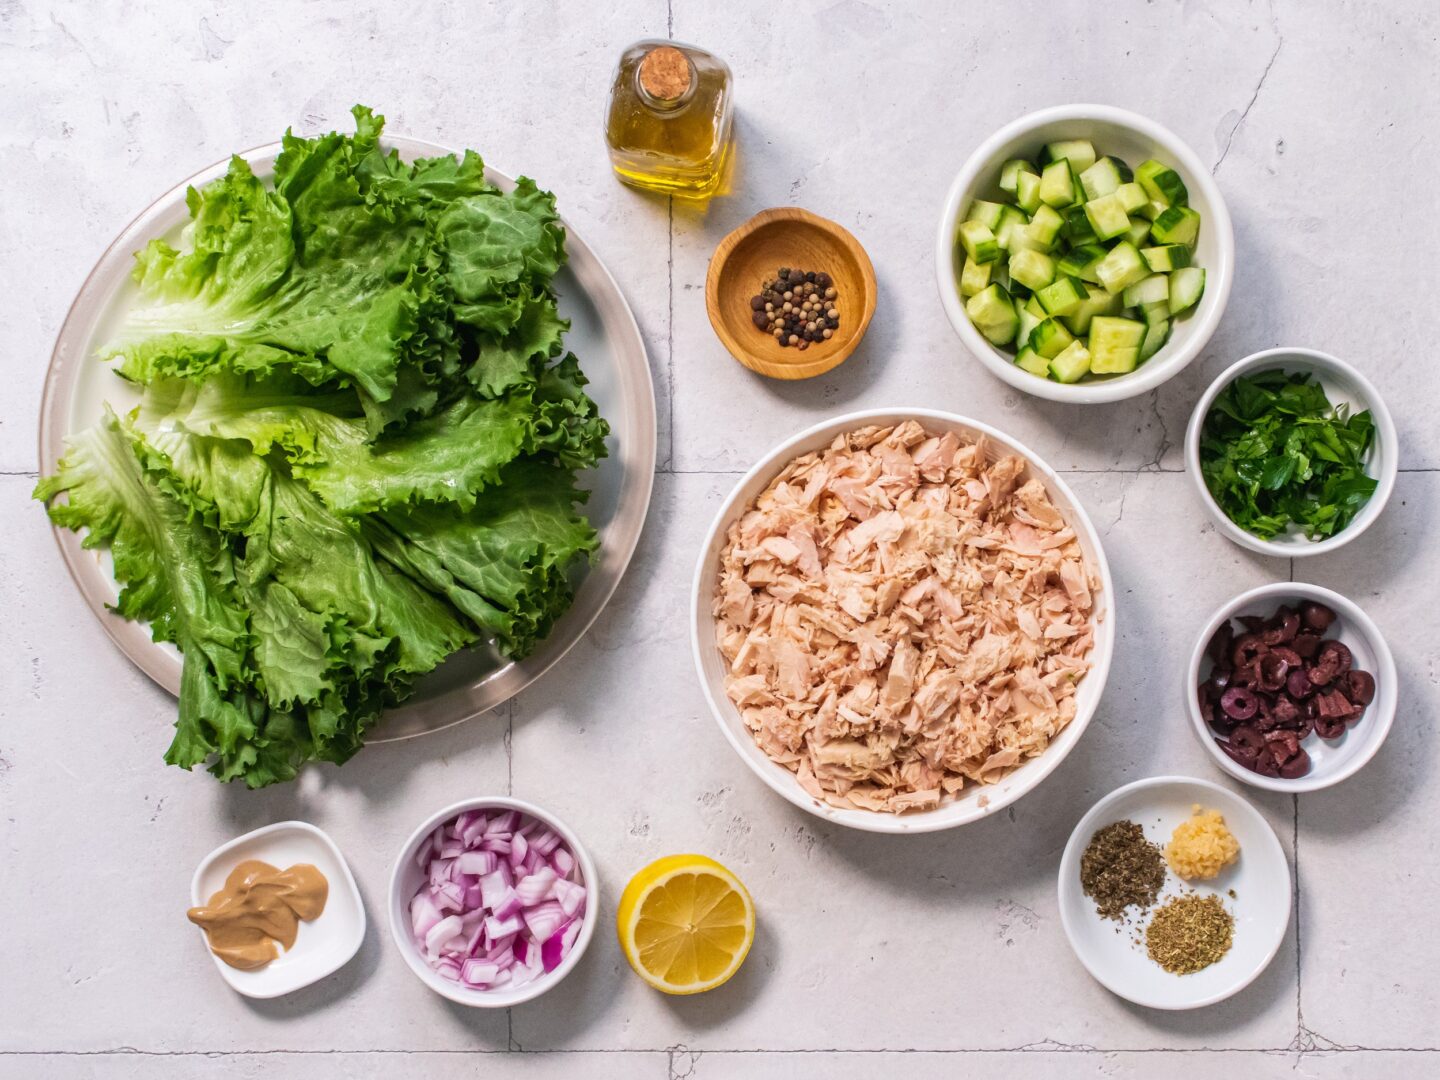 Ingredients for Tuna Salad Lettuce Wraps